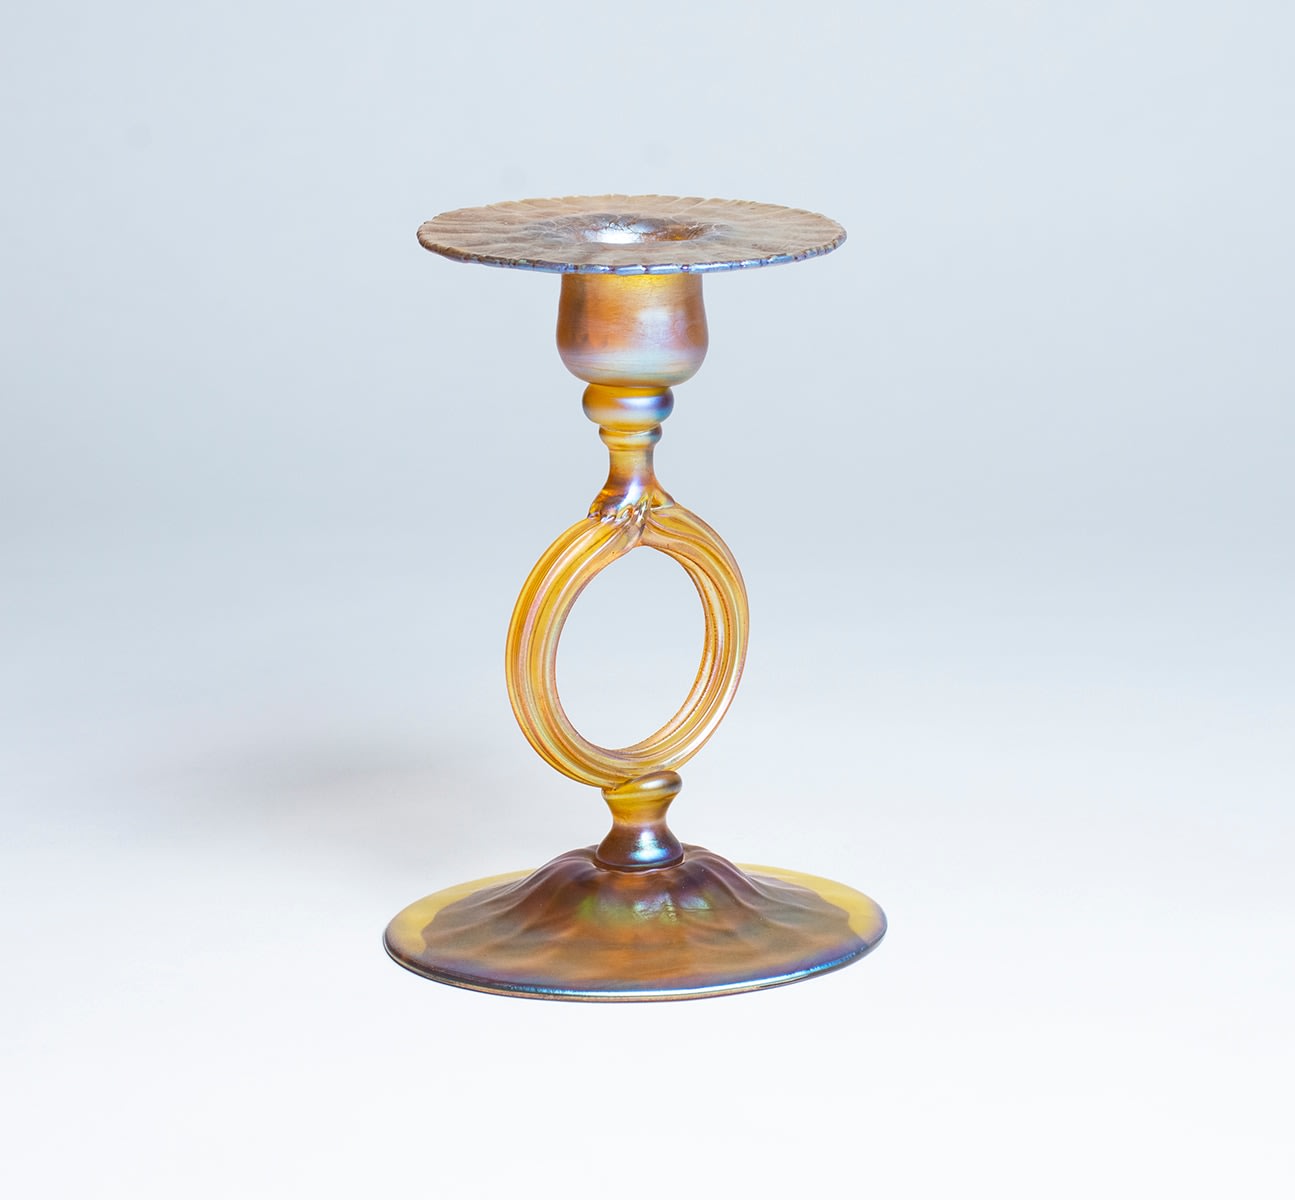 a gold iridescent Tiffany Favrile Glass Candle Stick, on a domed foot, with an open circular ring for the &quot;stem&quot; rising to support a flared candle cup.